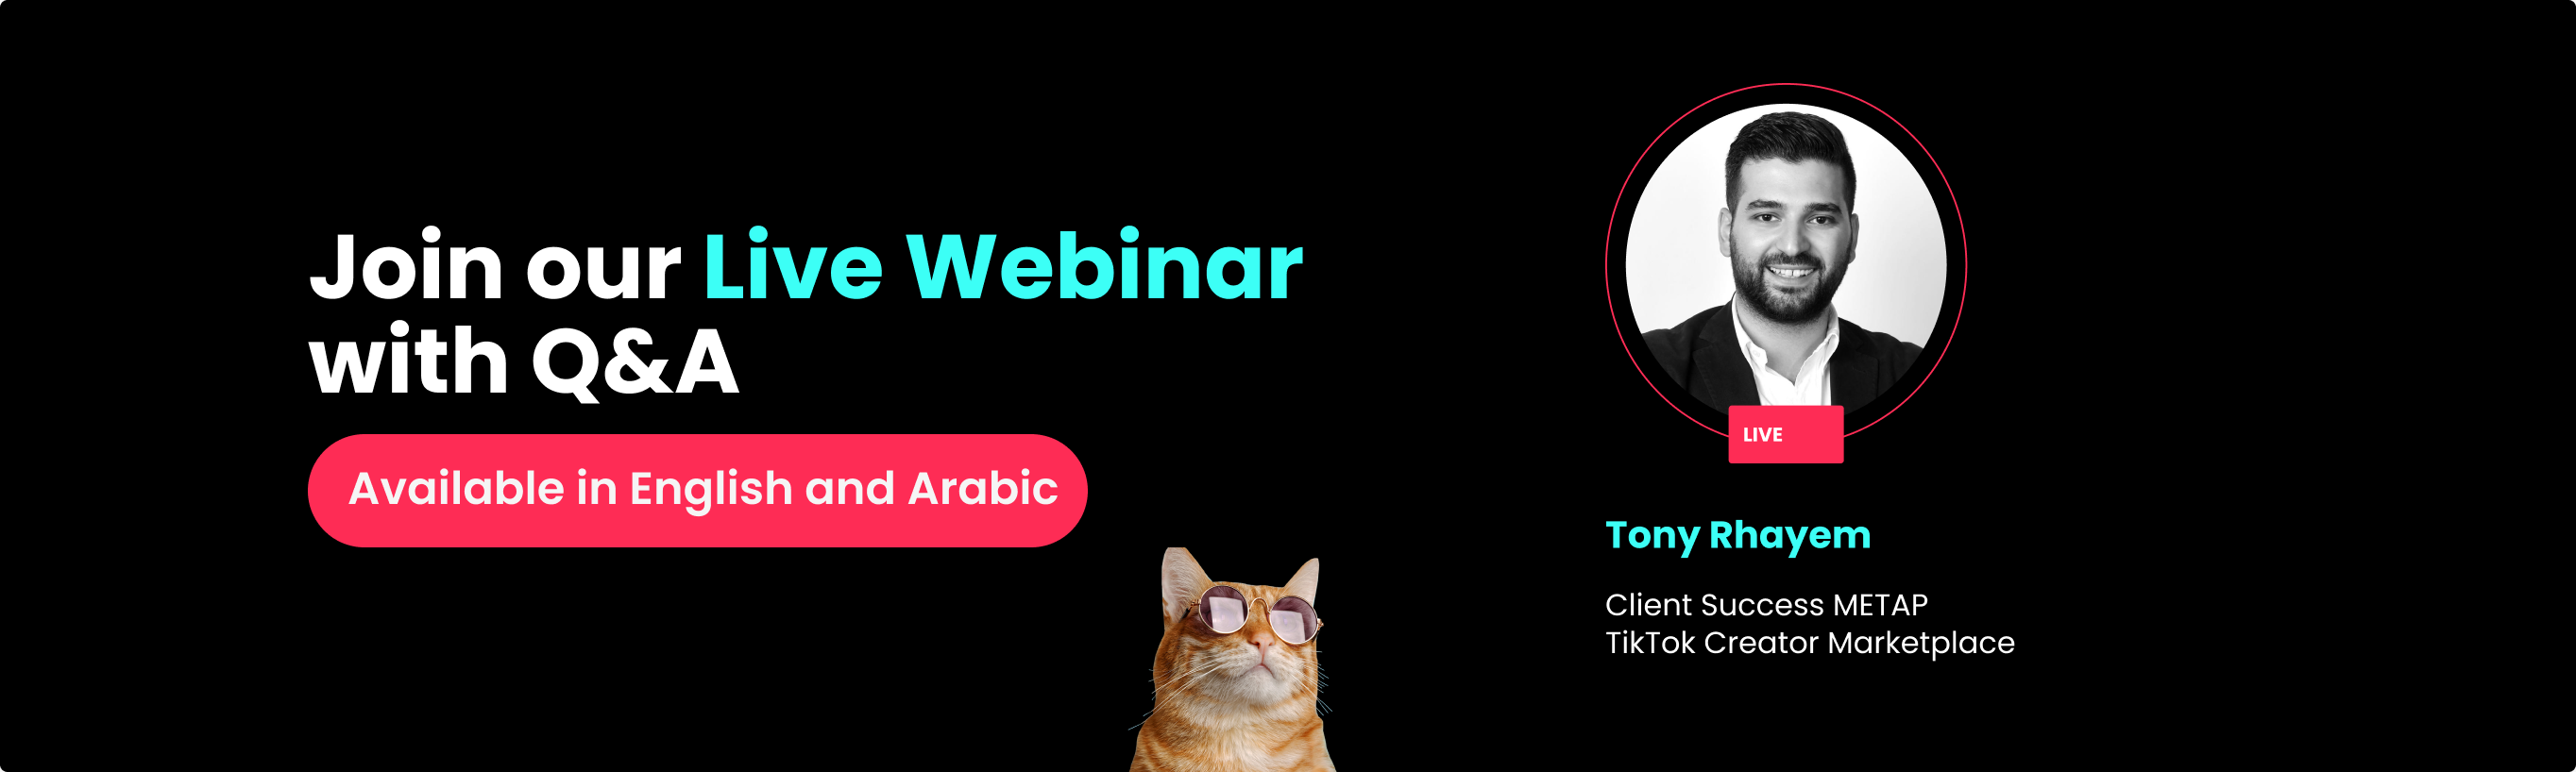 Join our Live Webinar